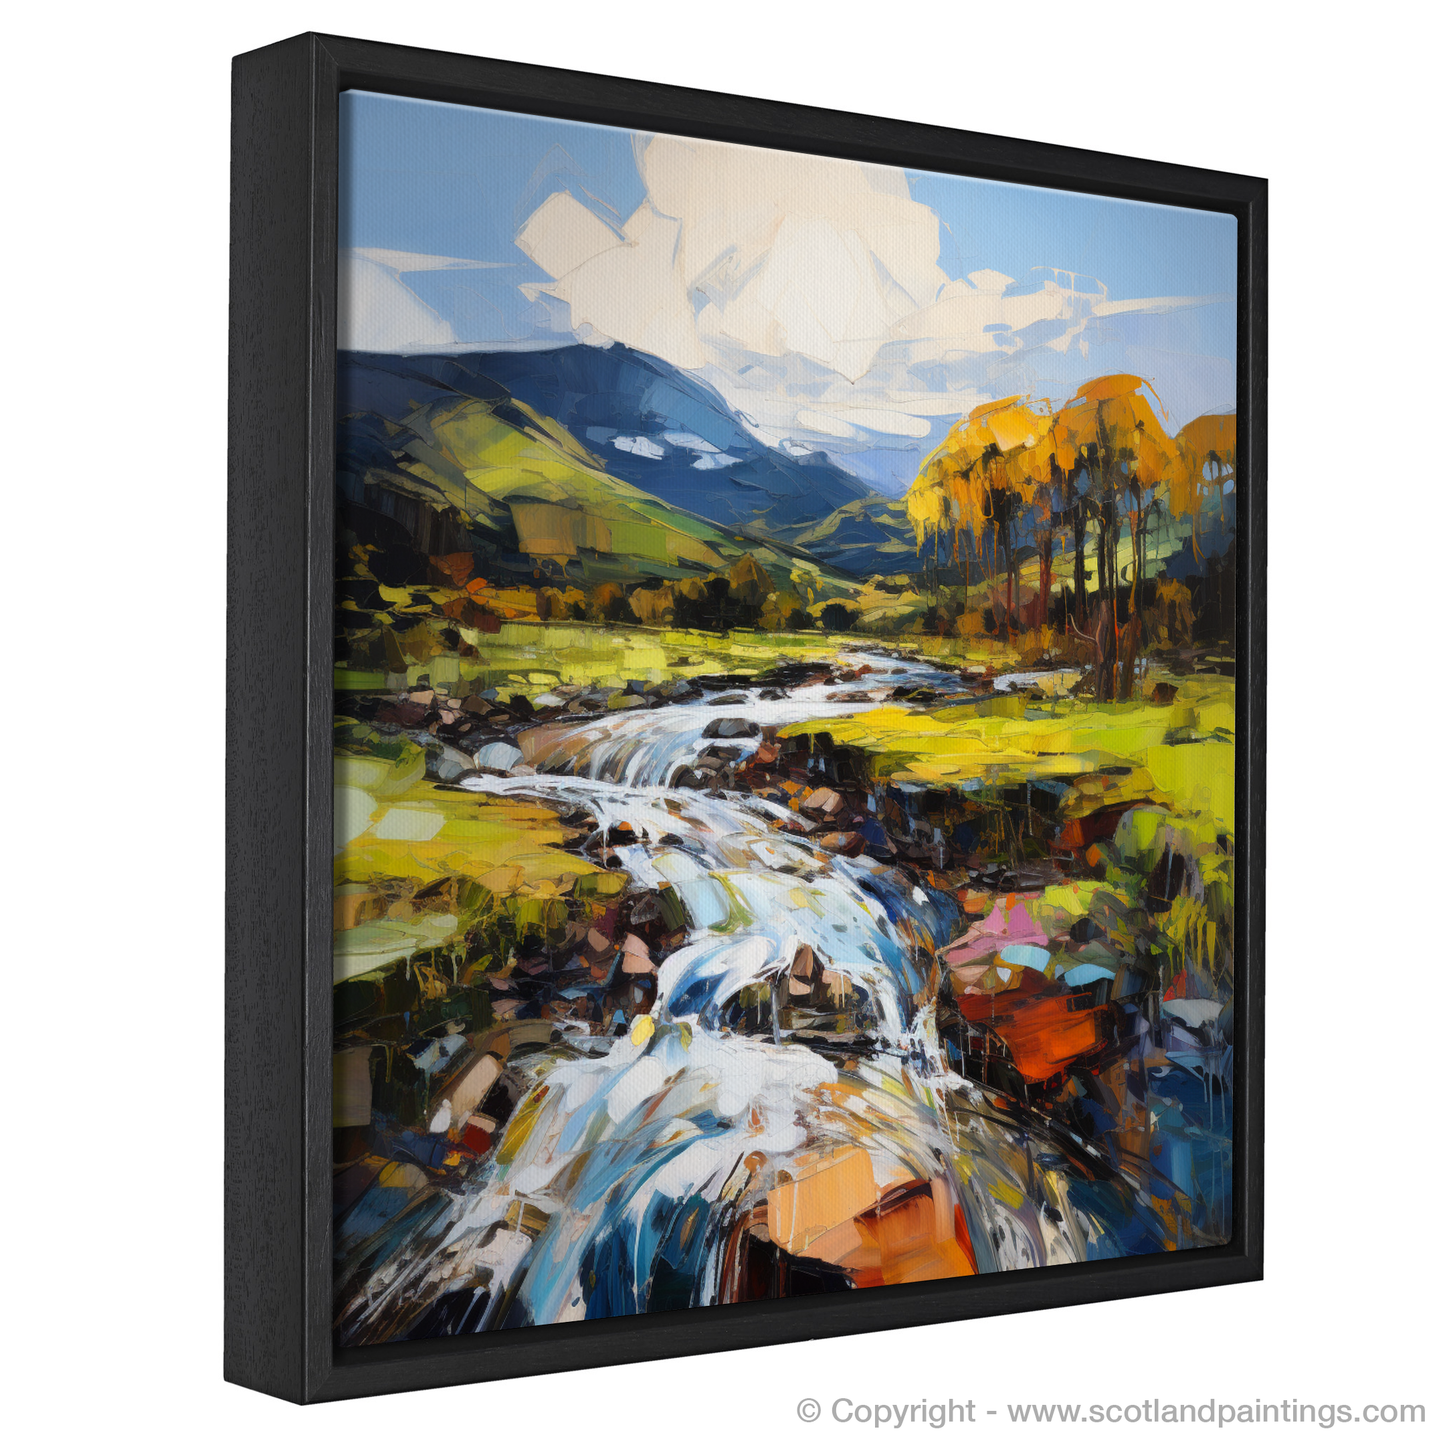 Painting and Art Print of River Carron, Ross-shire entitled "Carron's Vibrant Flow: An Expressionist Ode to Ross-shire".